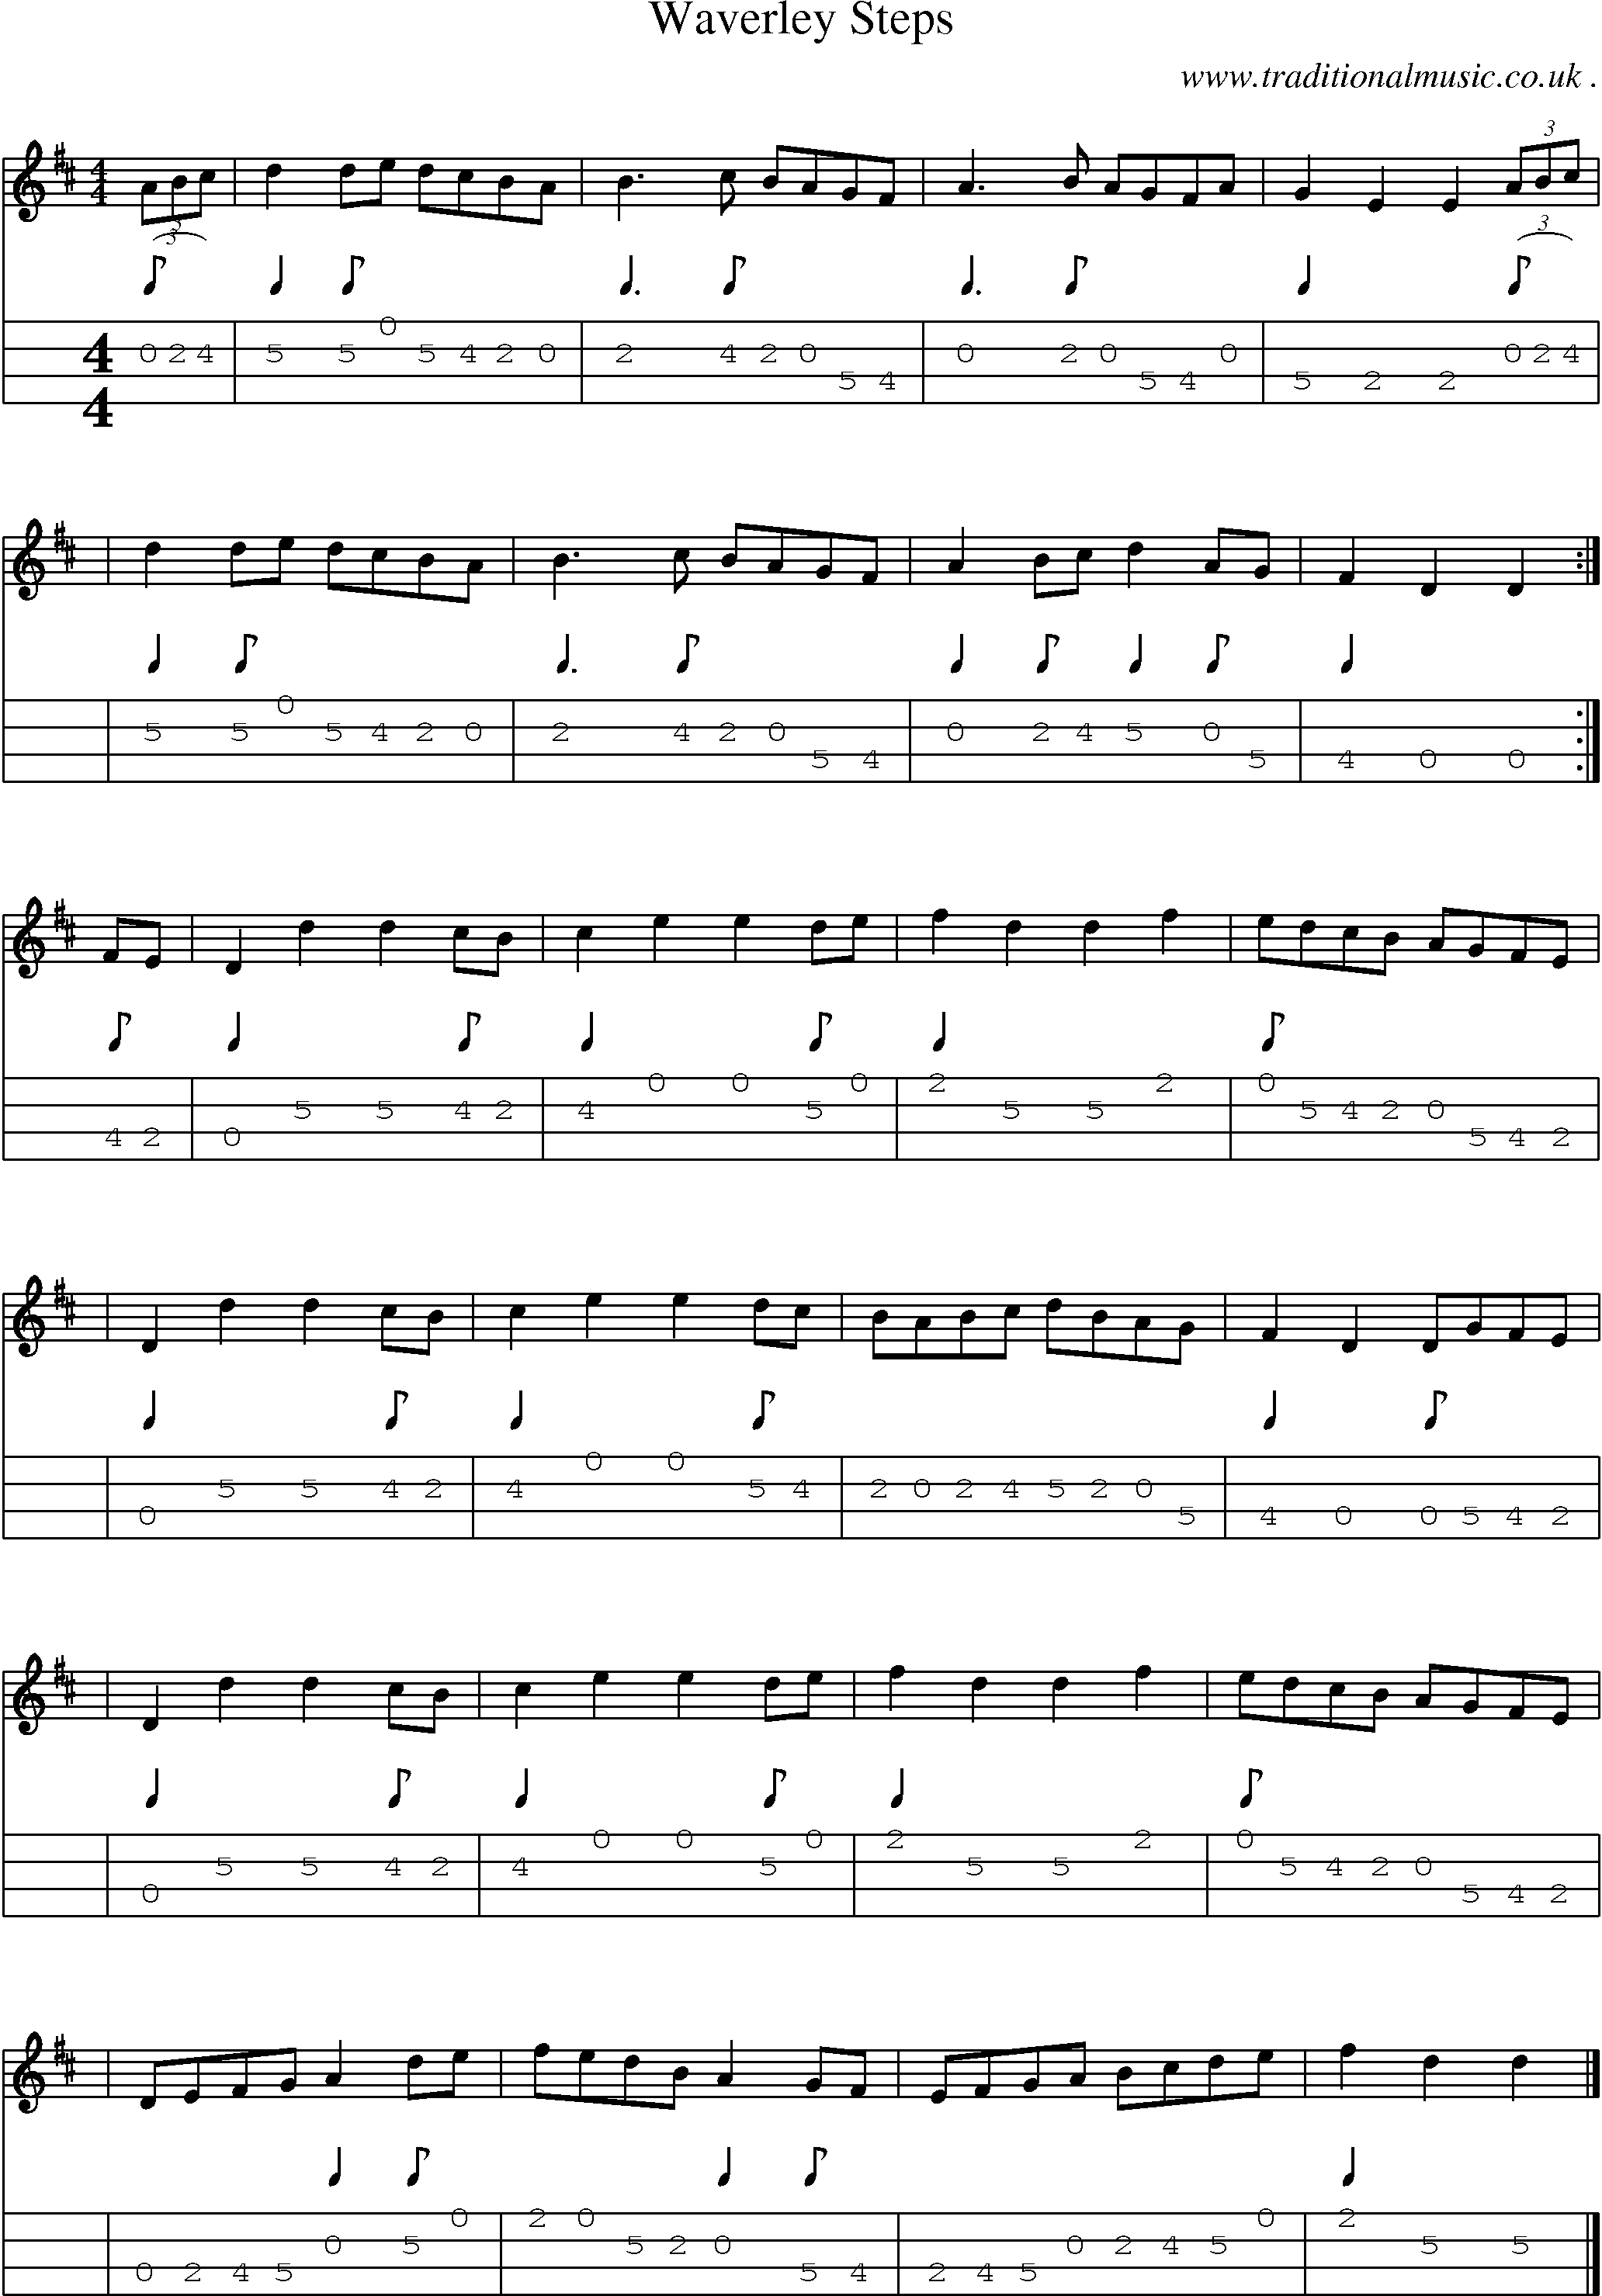 Sheet-music  score, Chords and Mandolin Tabs for Waverley Steps